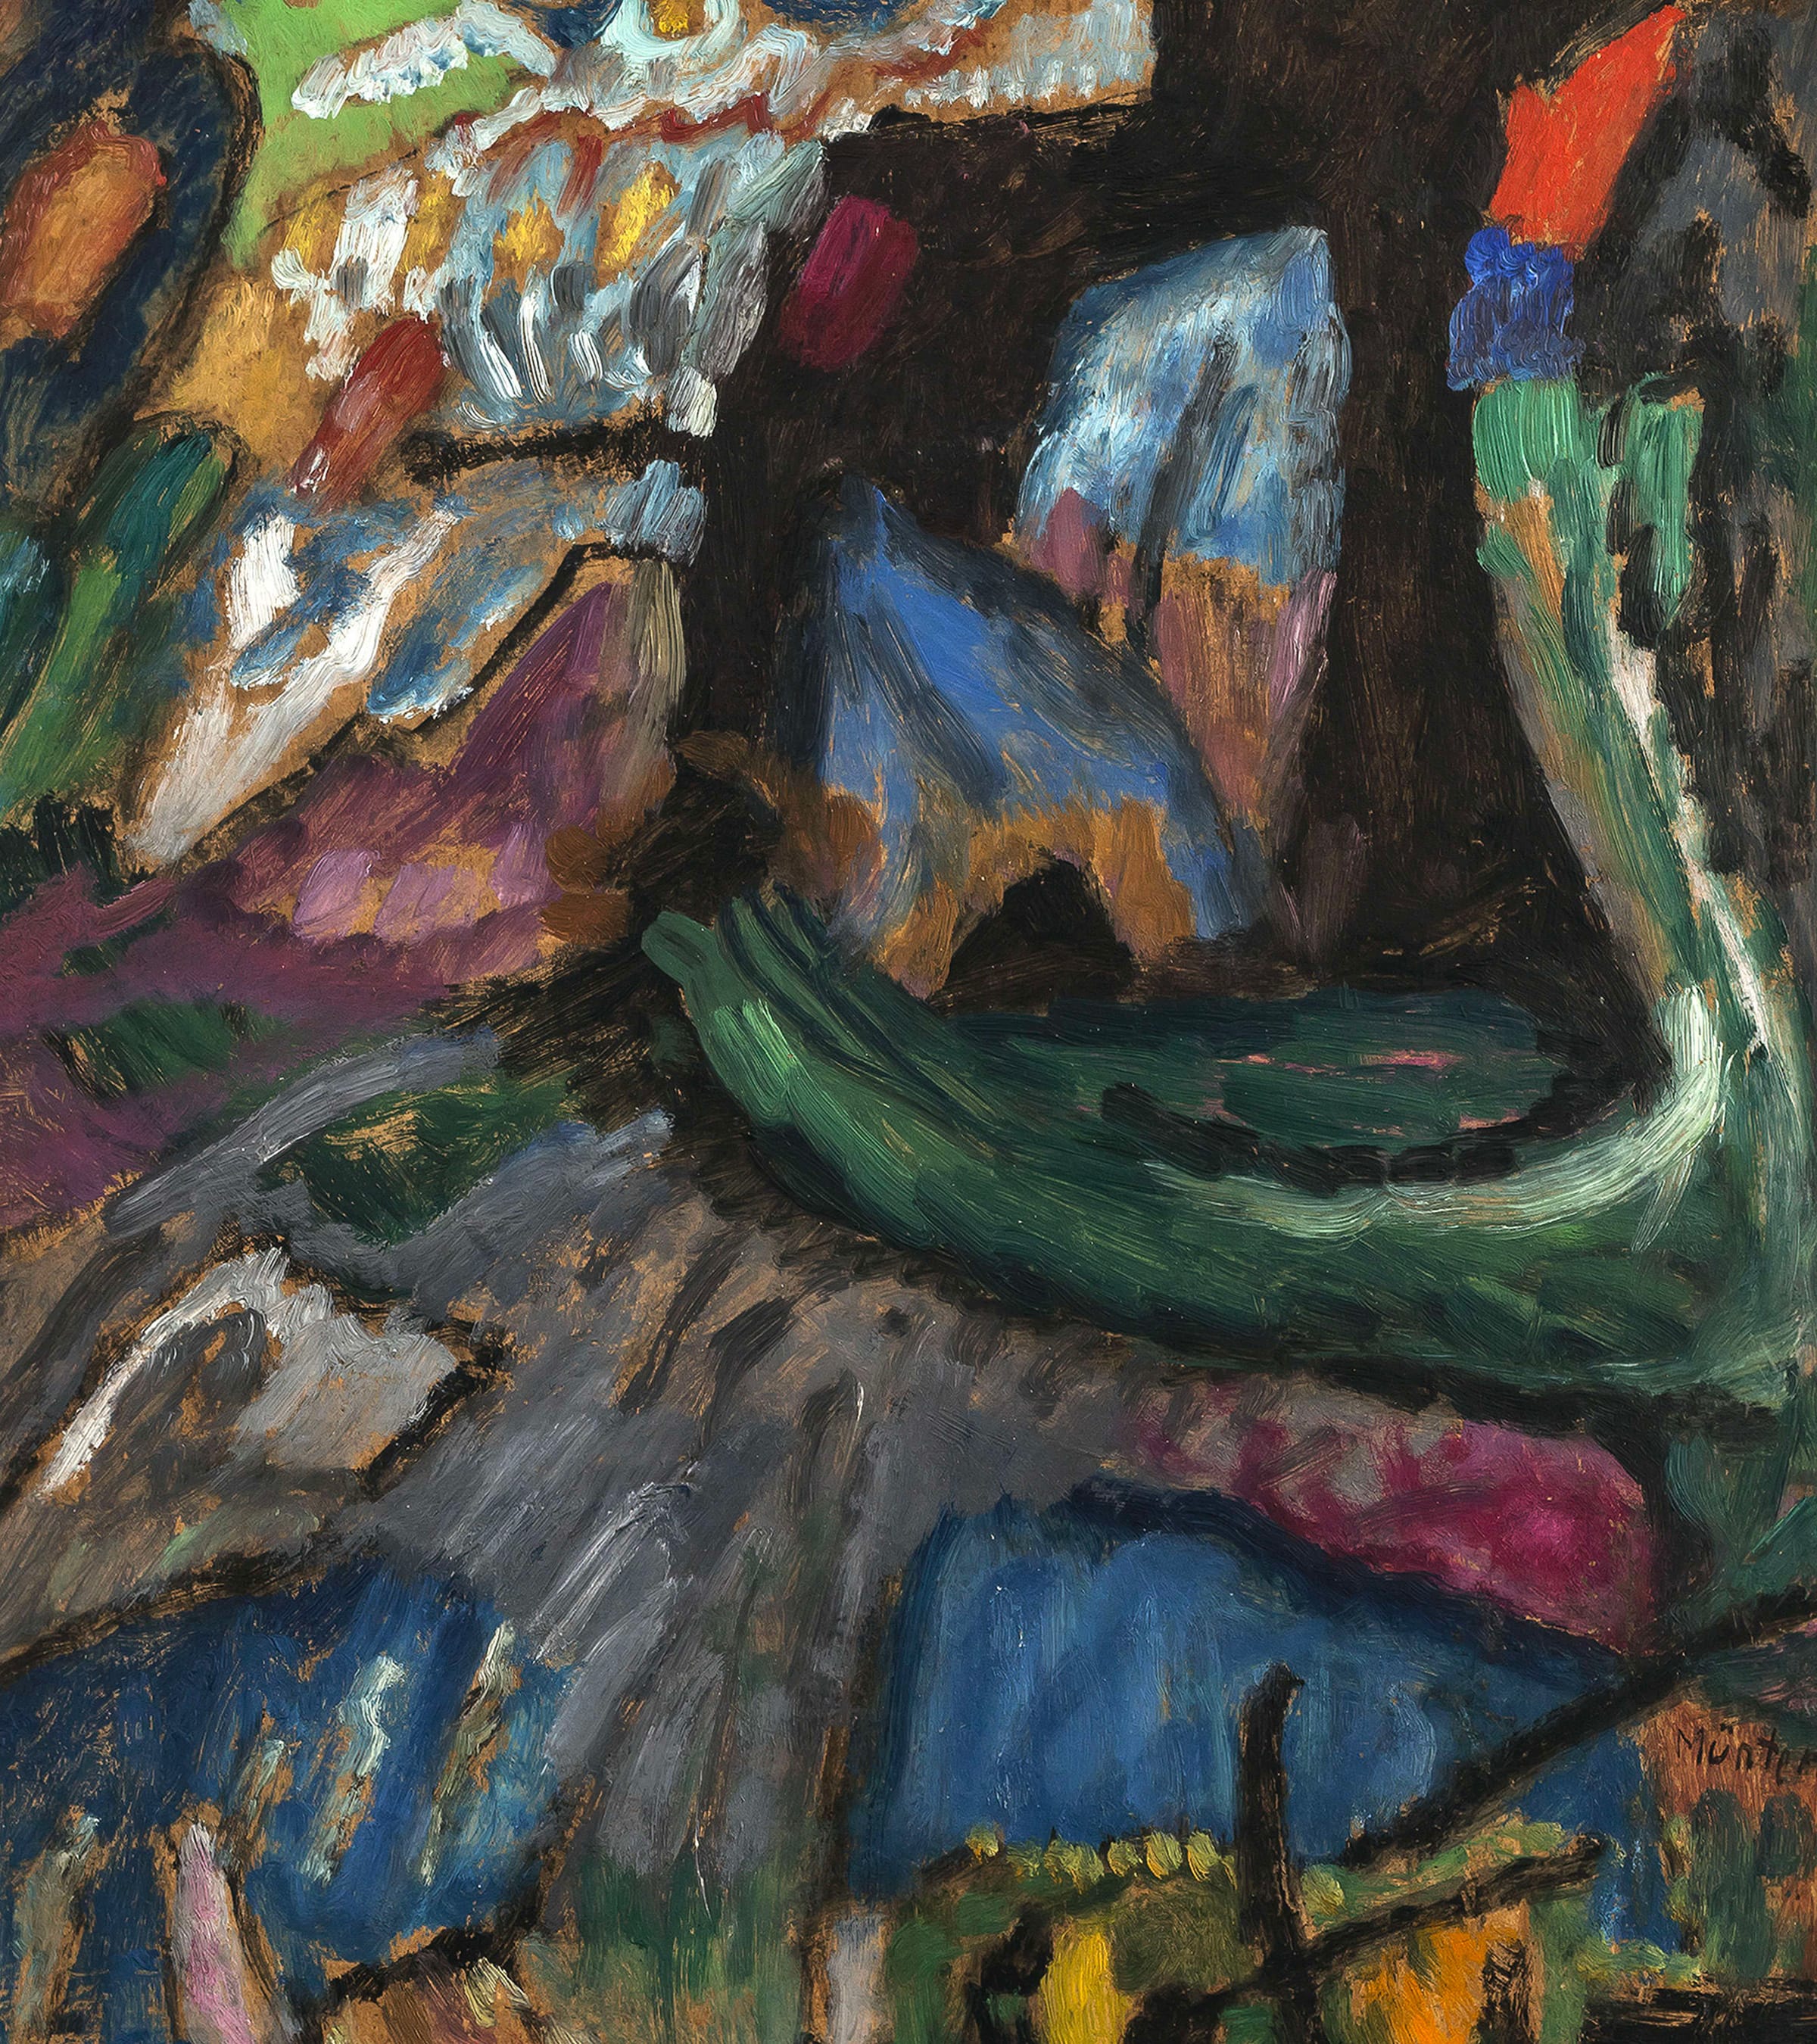 Gabriele Münter, Abstrakt (Abstract) (1915). Courtesy of Galerie Thomas.